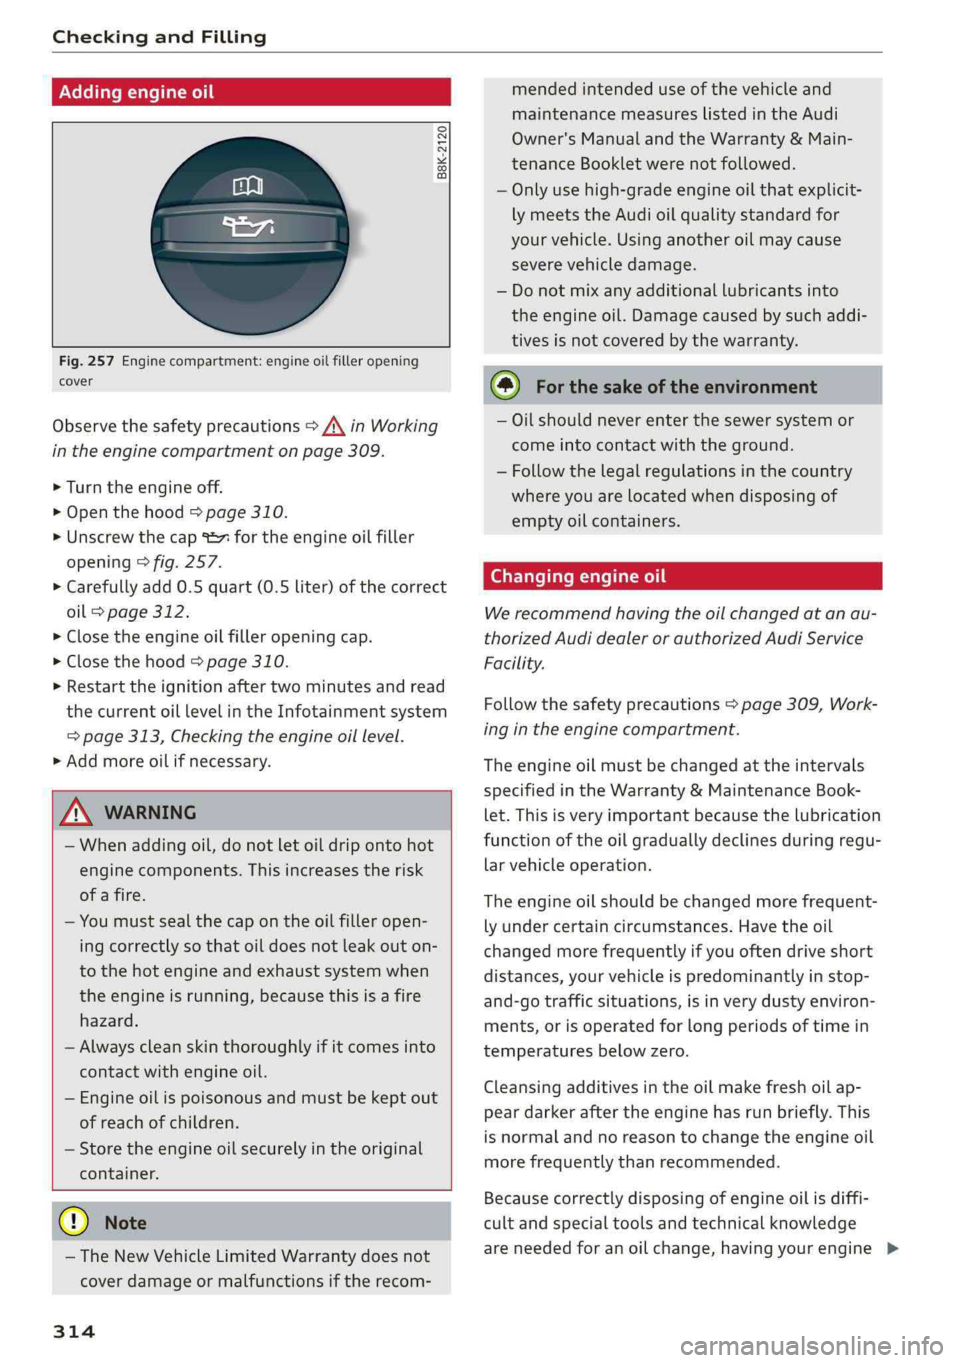 AUDI S4 2019  Owners Manual CheckingandFilling
 
Addingengineoil
 
B8K-2120
 
 
  
Fig.257Enginecompartment:engineoilfilleropening
cover
Observethesafetyprecautions>A\inWorking
intheenginecompartmentonpage309.
>Turn theengineoff